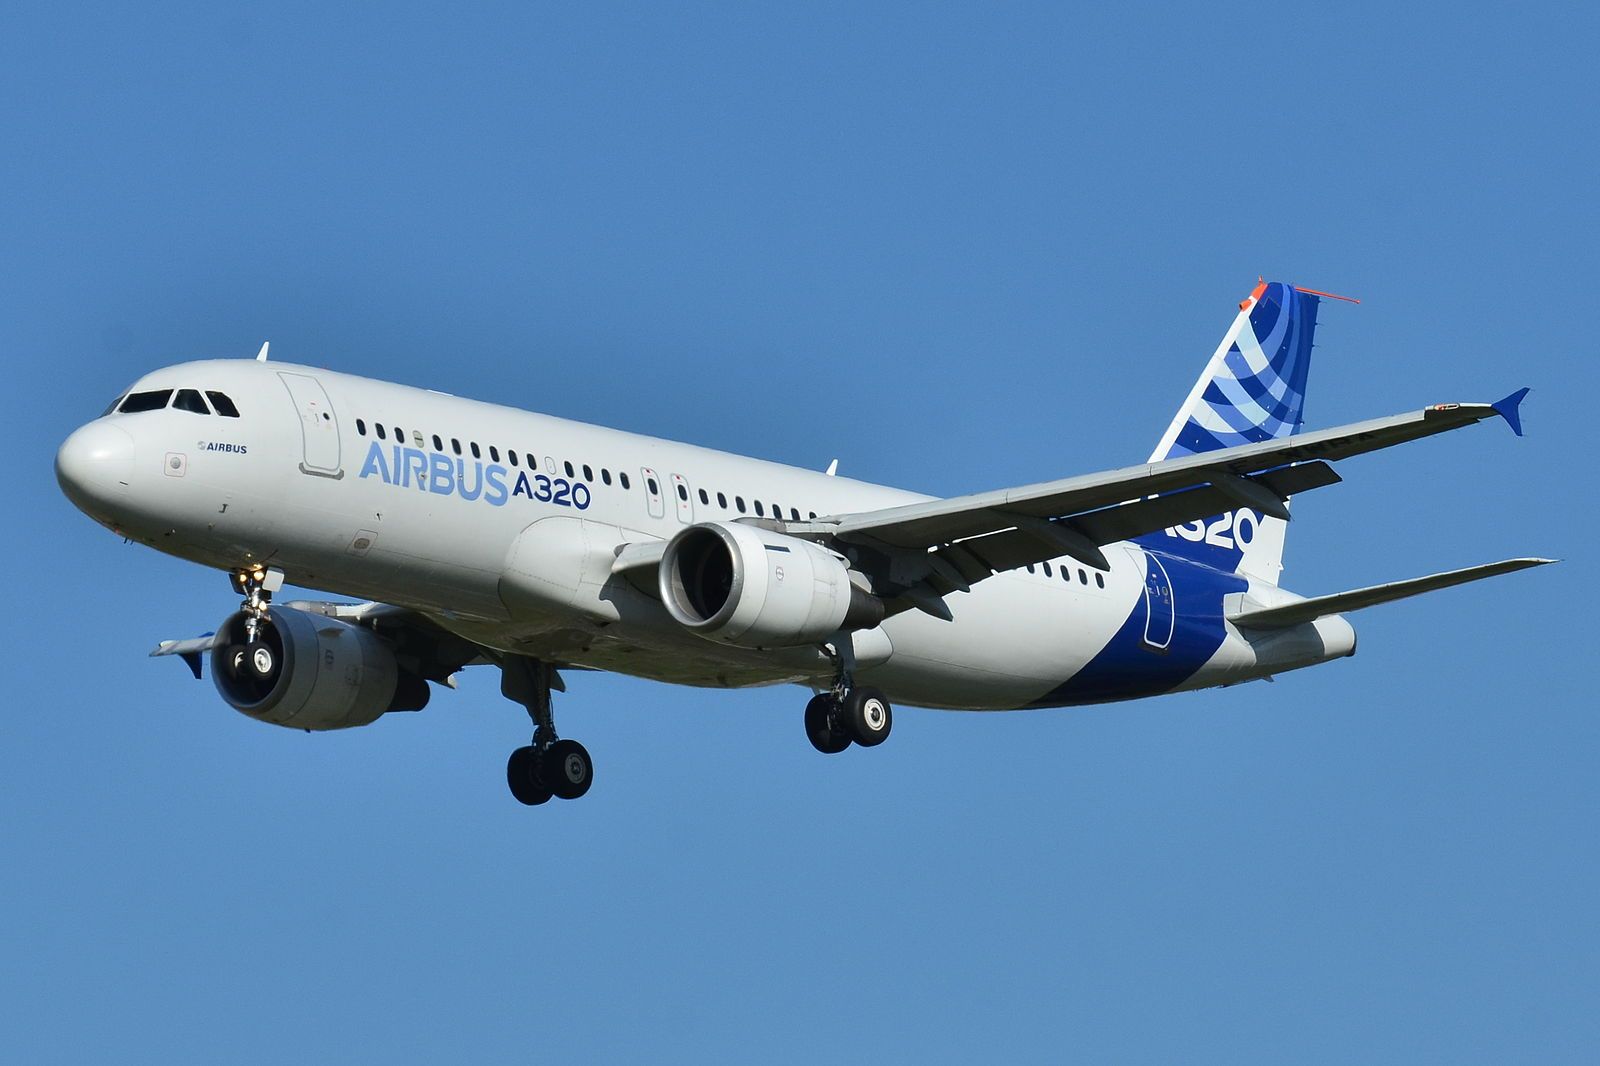 Airbus A320 in manufacturer livery